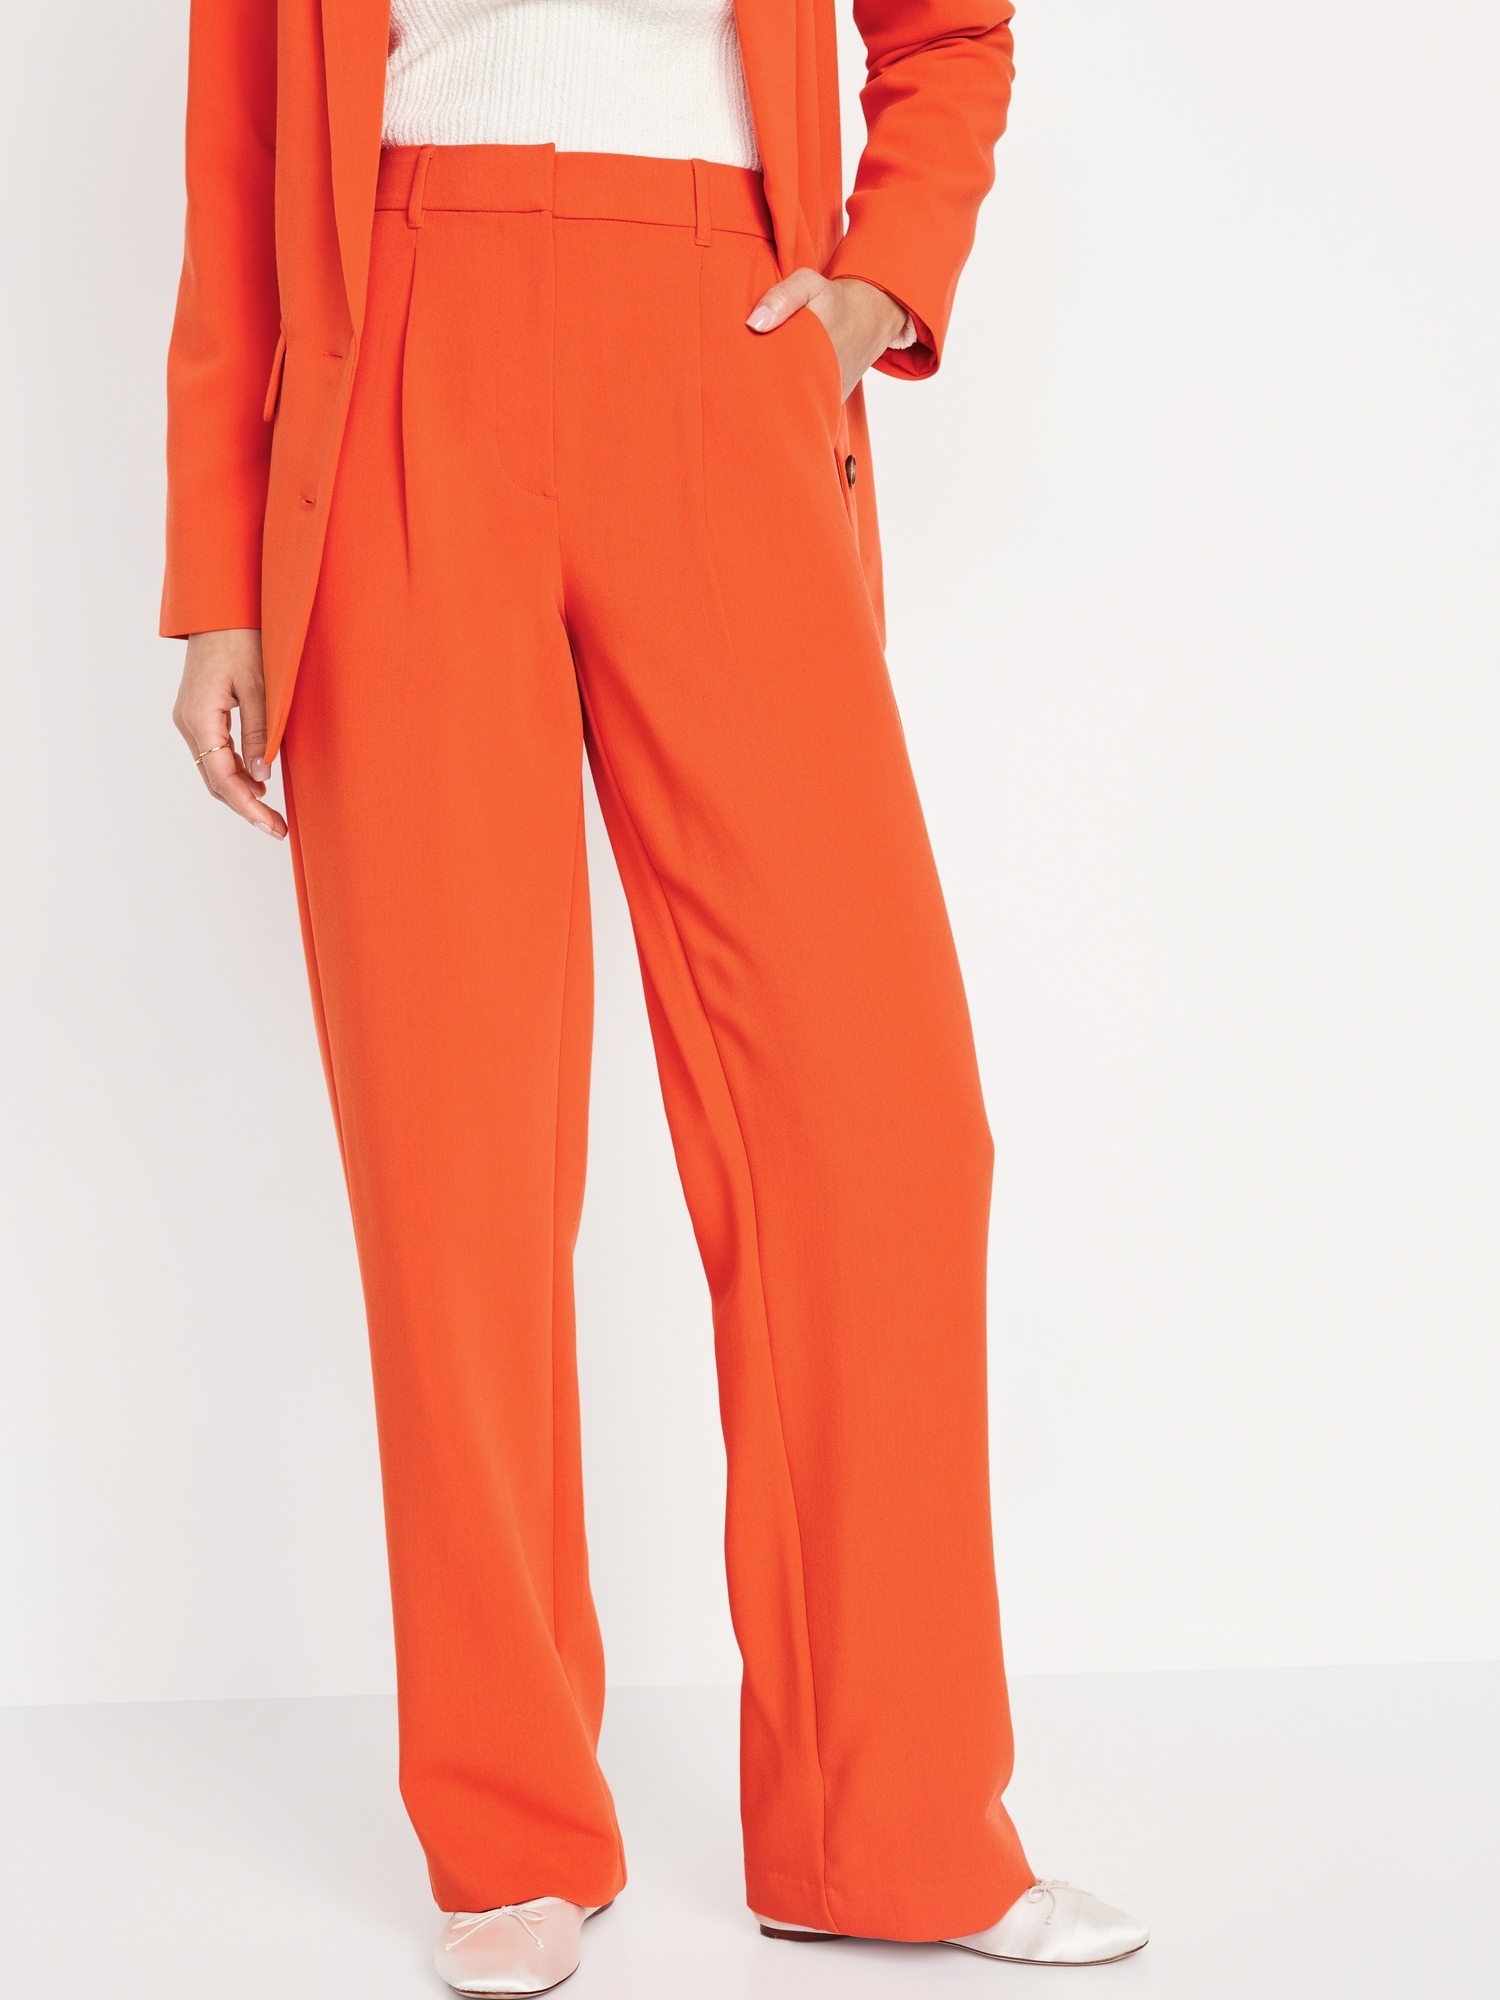 Women's High-Rise Tapered Ankle Tie-Front Pants - A New Day Orange 12